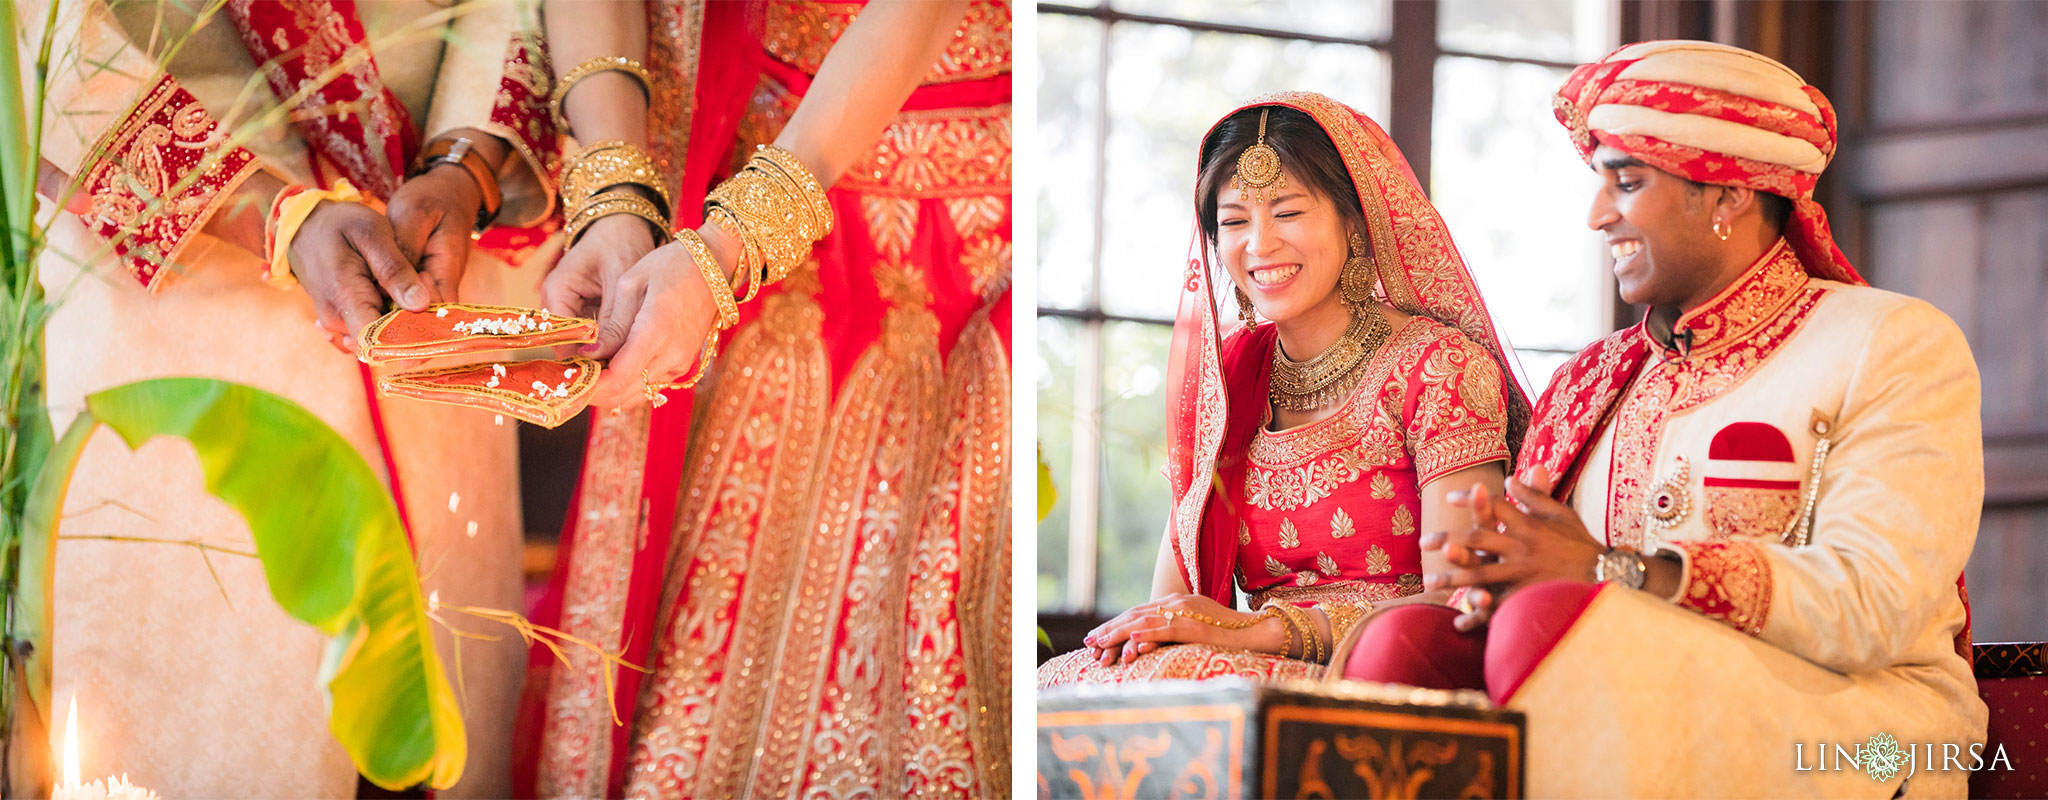 19 the ebell of los angeles indian wedding ceremony photography